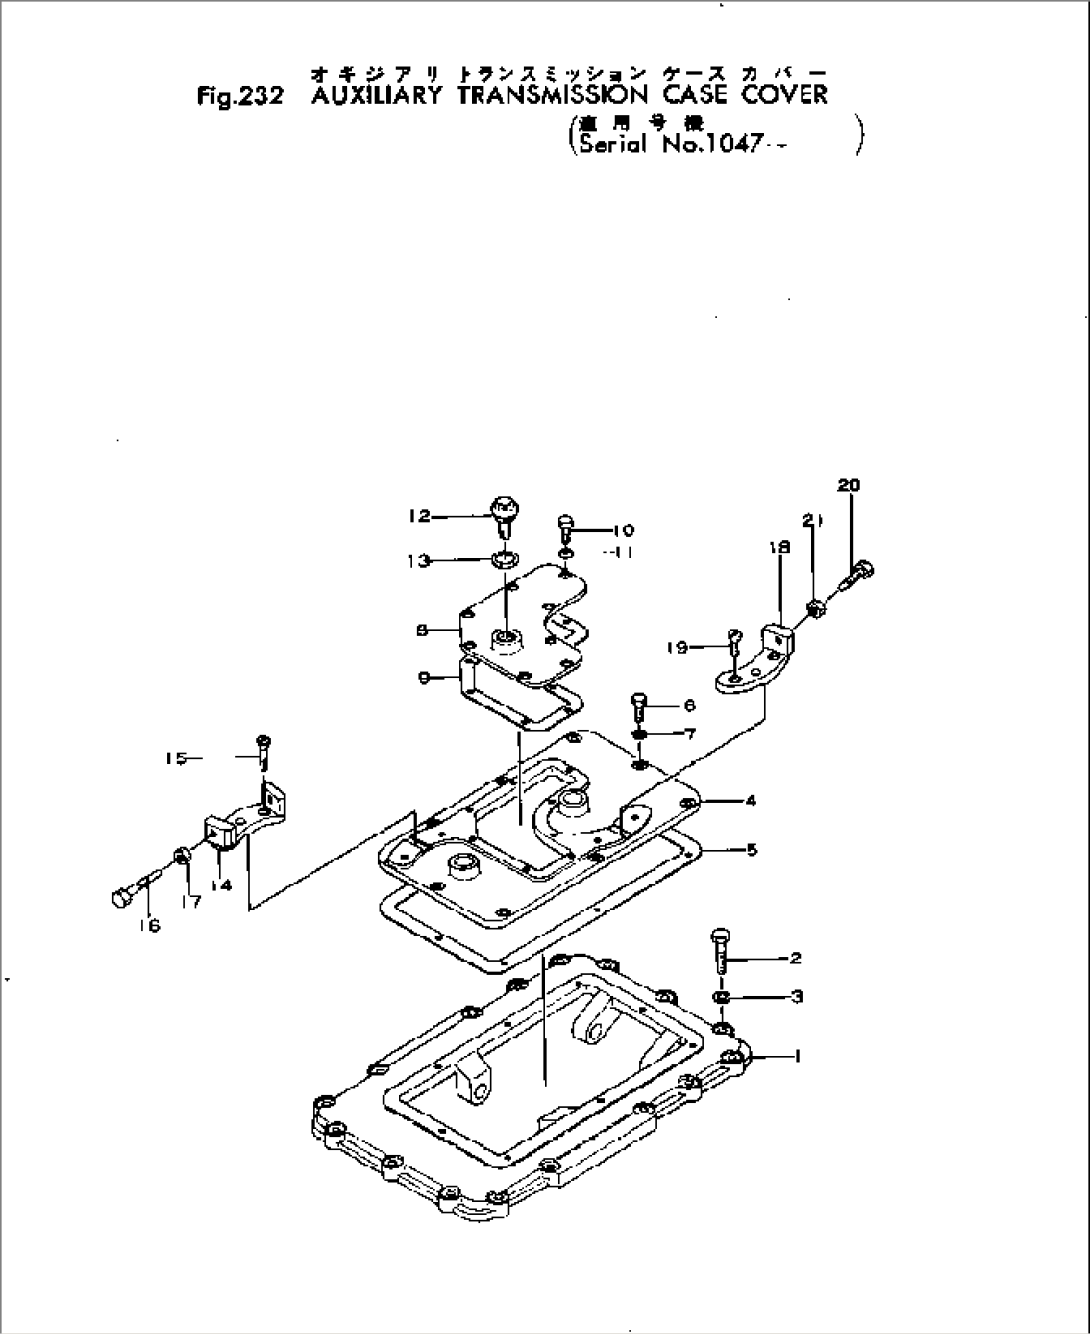 AUXILIARY TRANSMISSION CASE COVER